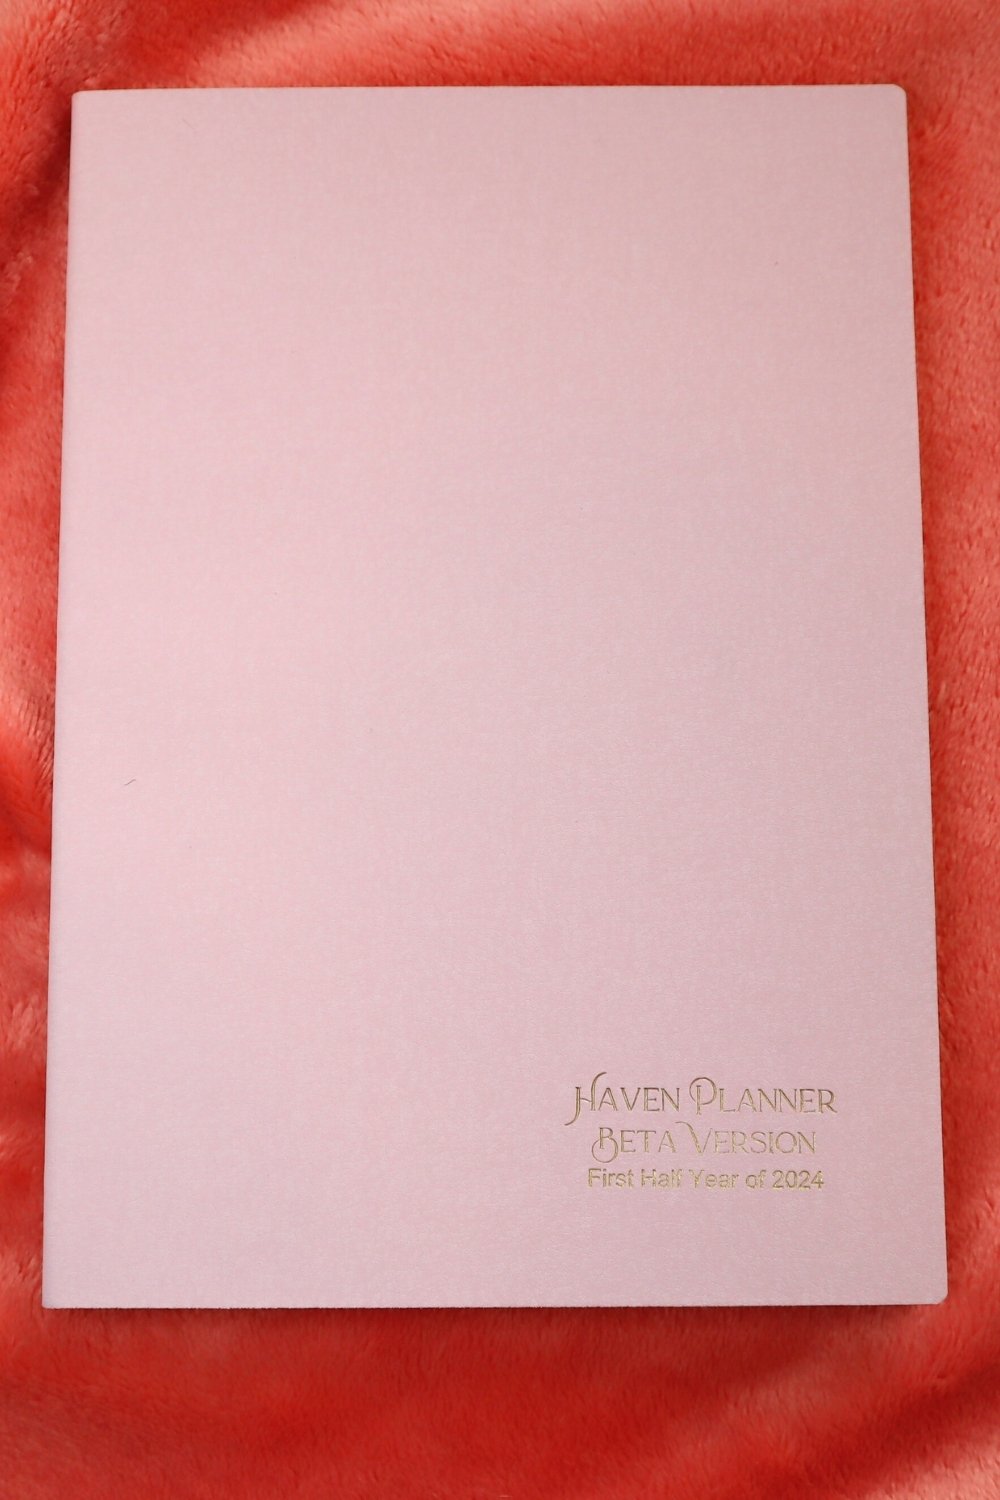 New Tomoe River Paper Planner - The Haven Planner